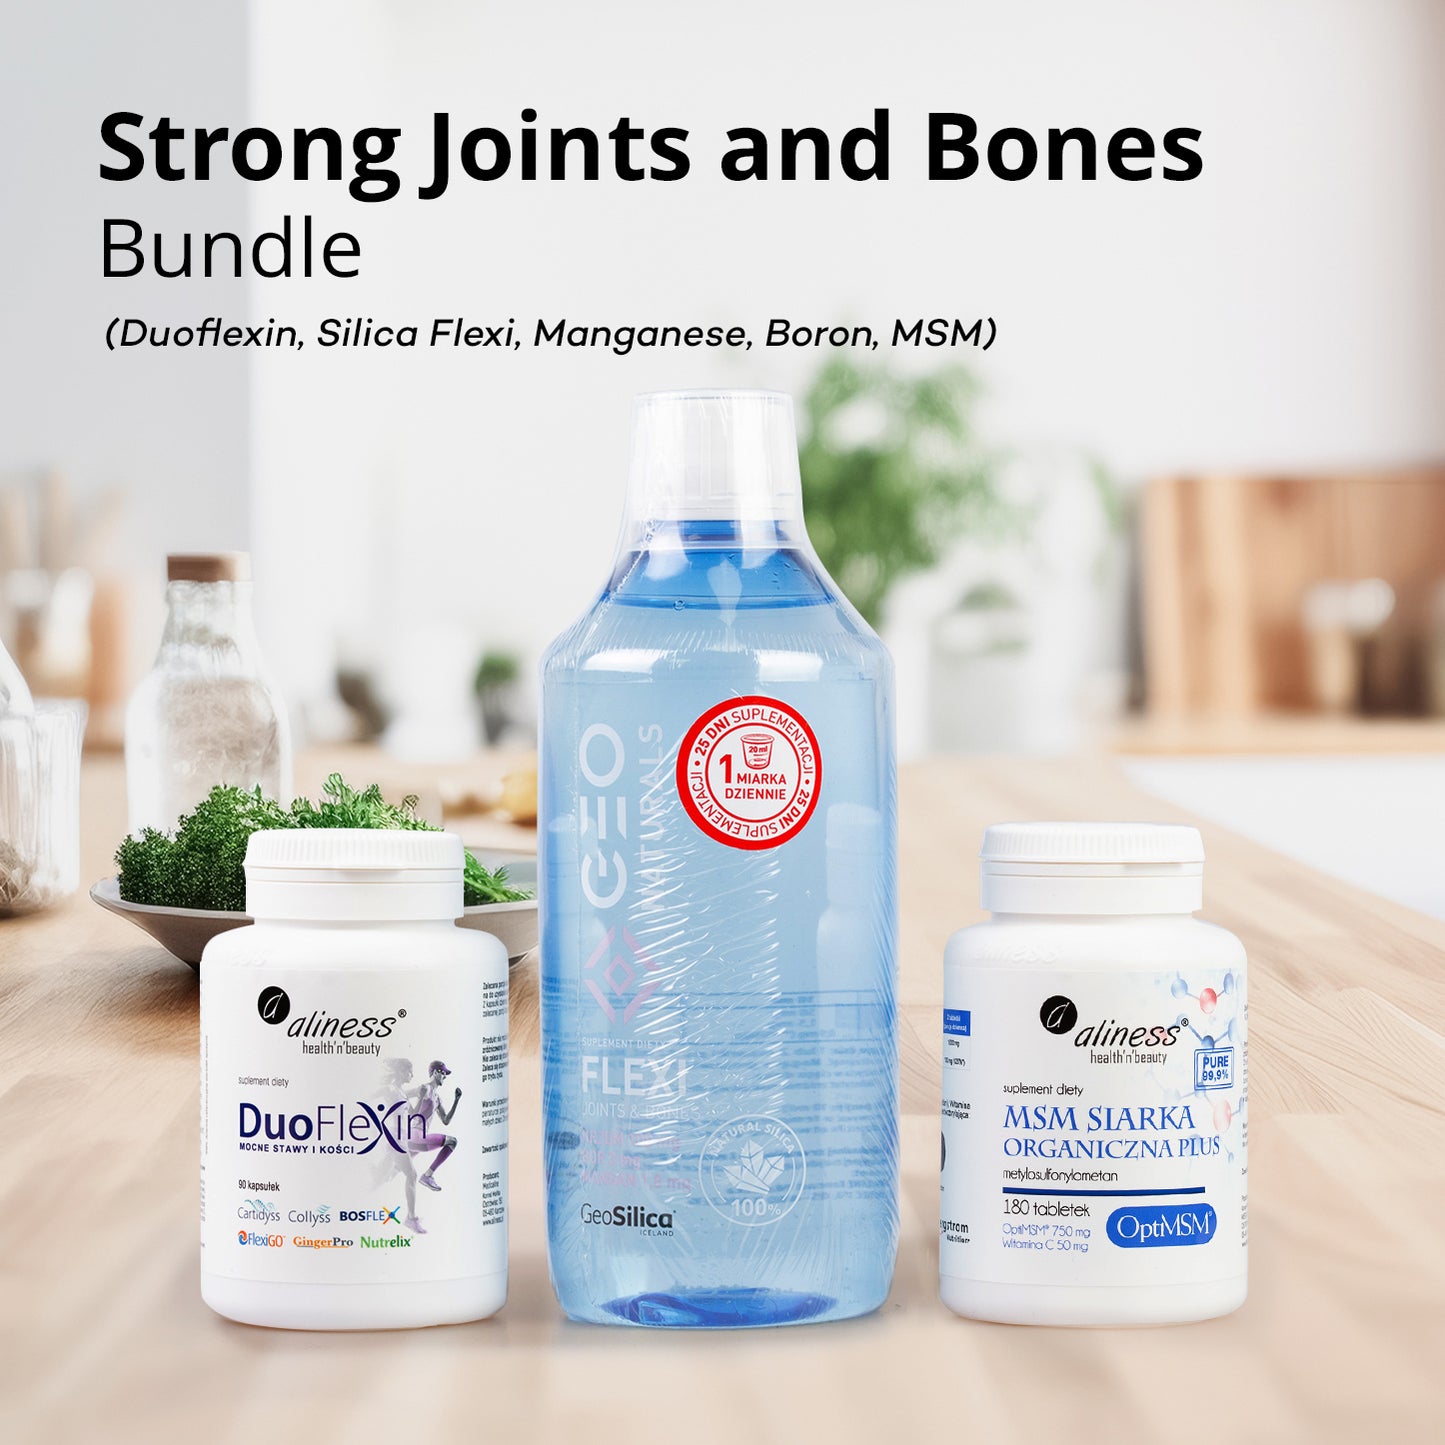 Strong Joints and Bones Bundle (Duoflexin, Silica Flexi, Manganese, Boron, MSM)